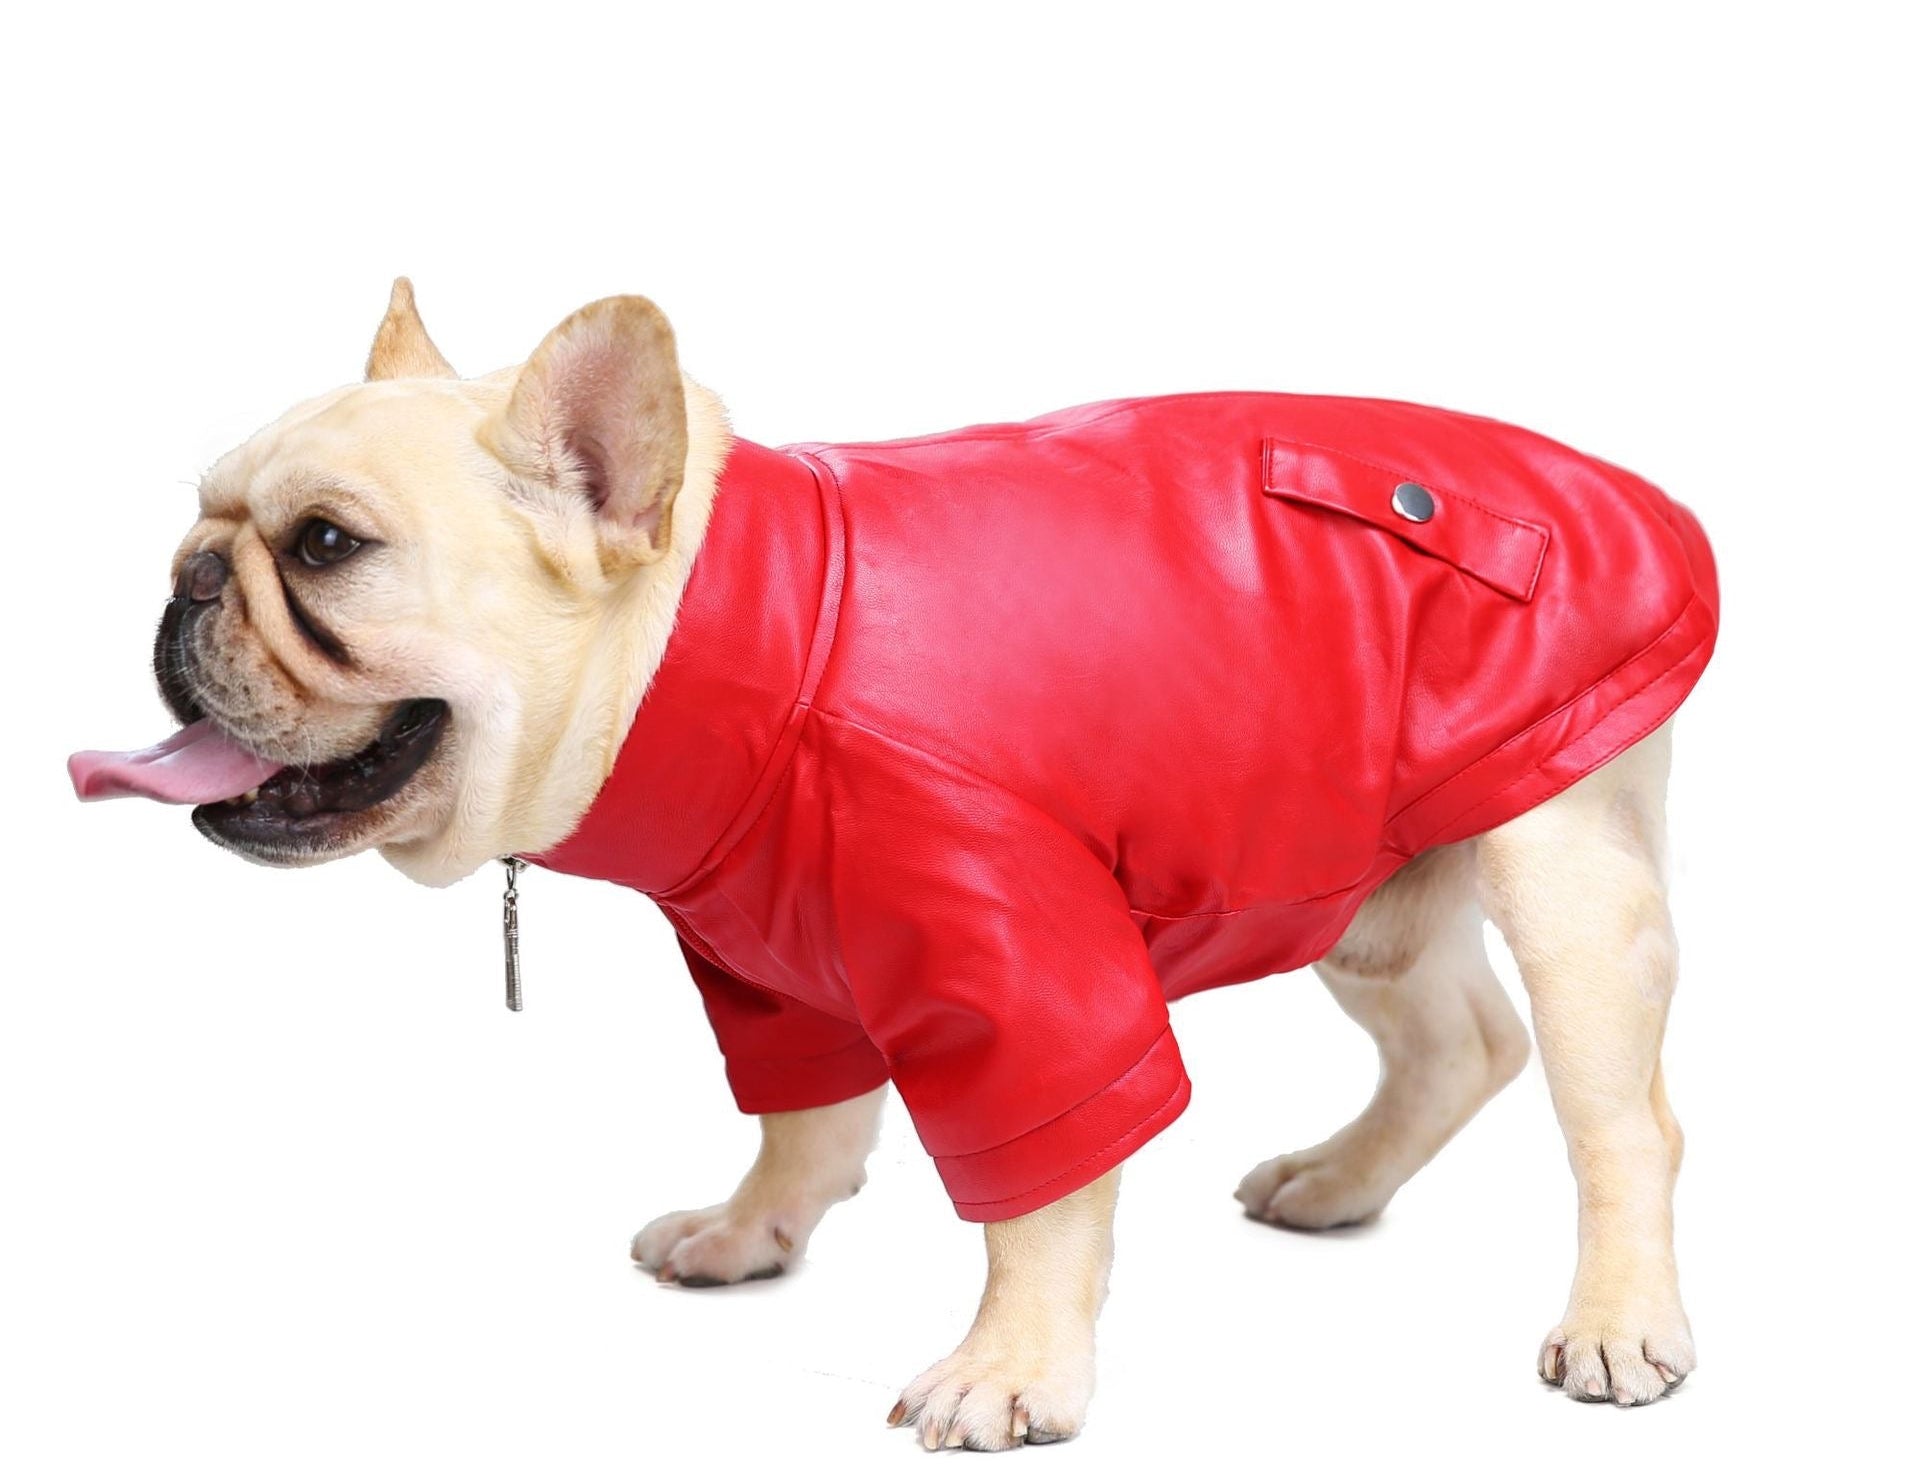 BigMobster 2 - Dog’s Pu Leather Jacket - Sarman Fashion - Wholesale Clothing Fashion Brand for Men from Canada